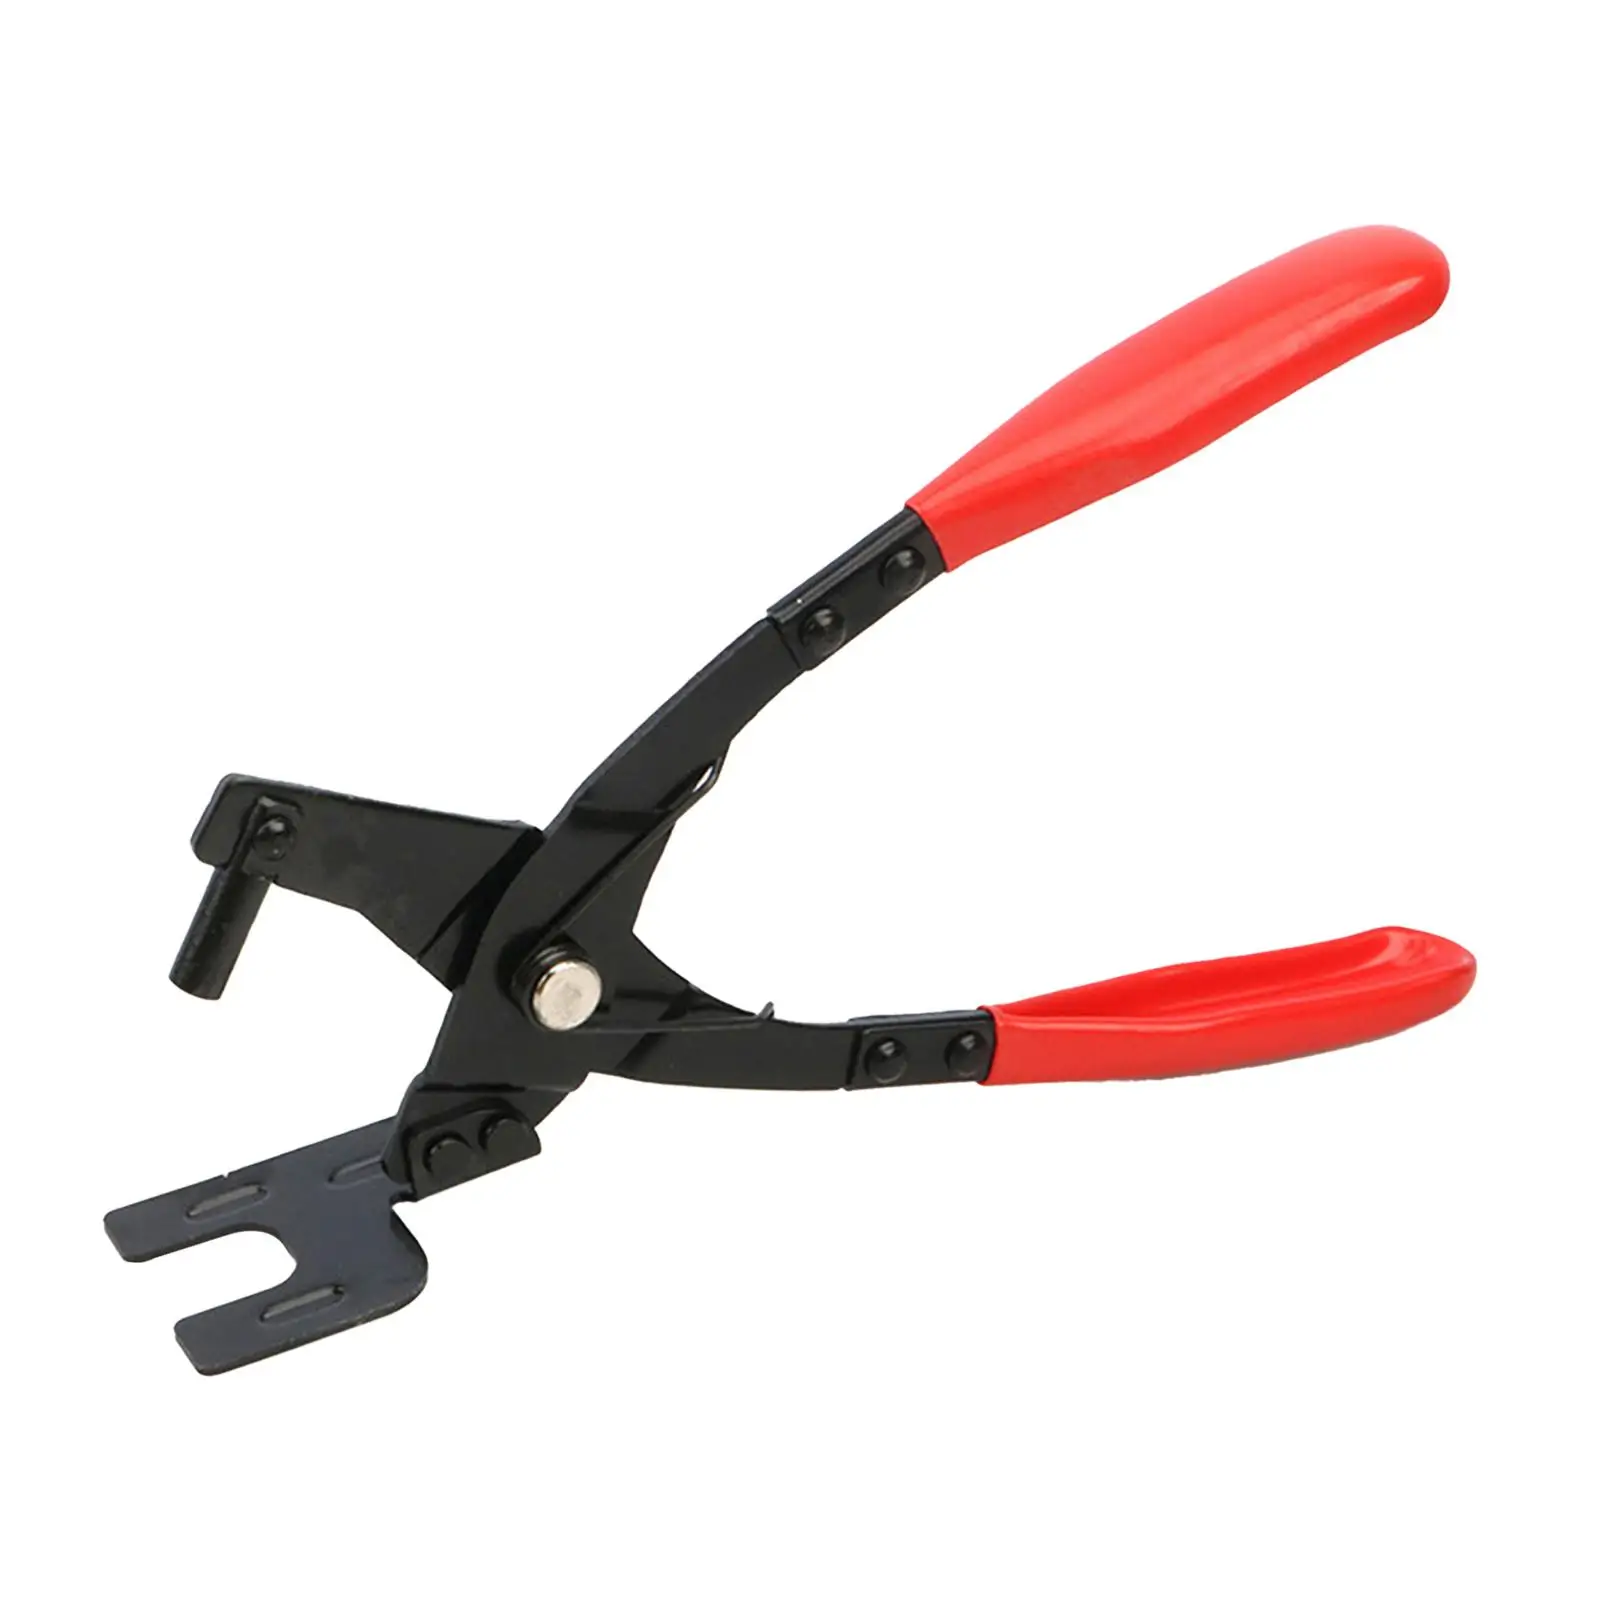 Exhaust Hanger Removal Pliers, Rubber Exhaust Hanger Removal Tool, Exhaust